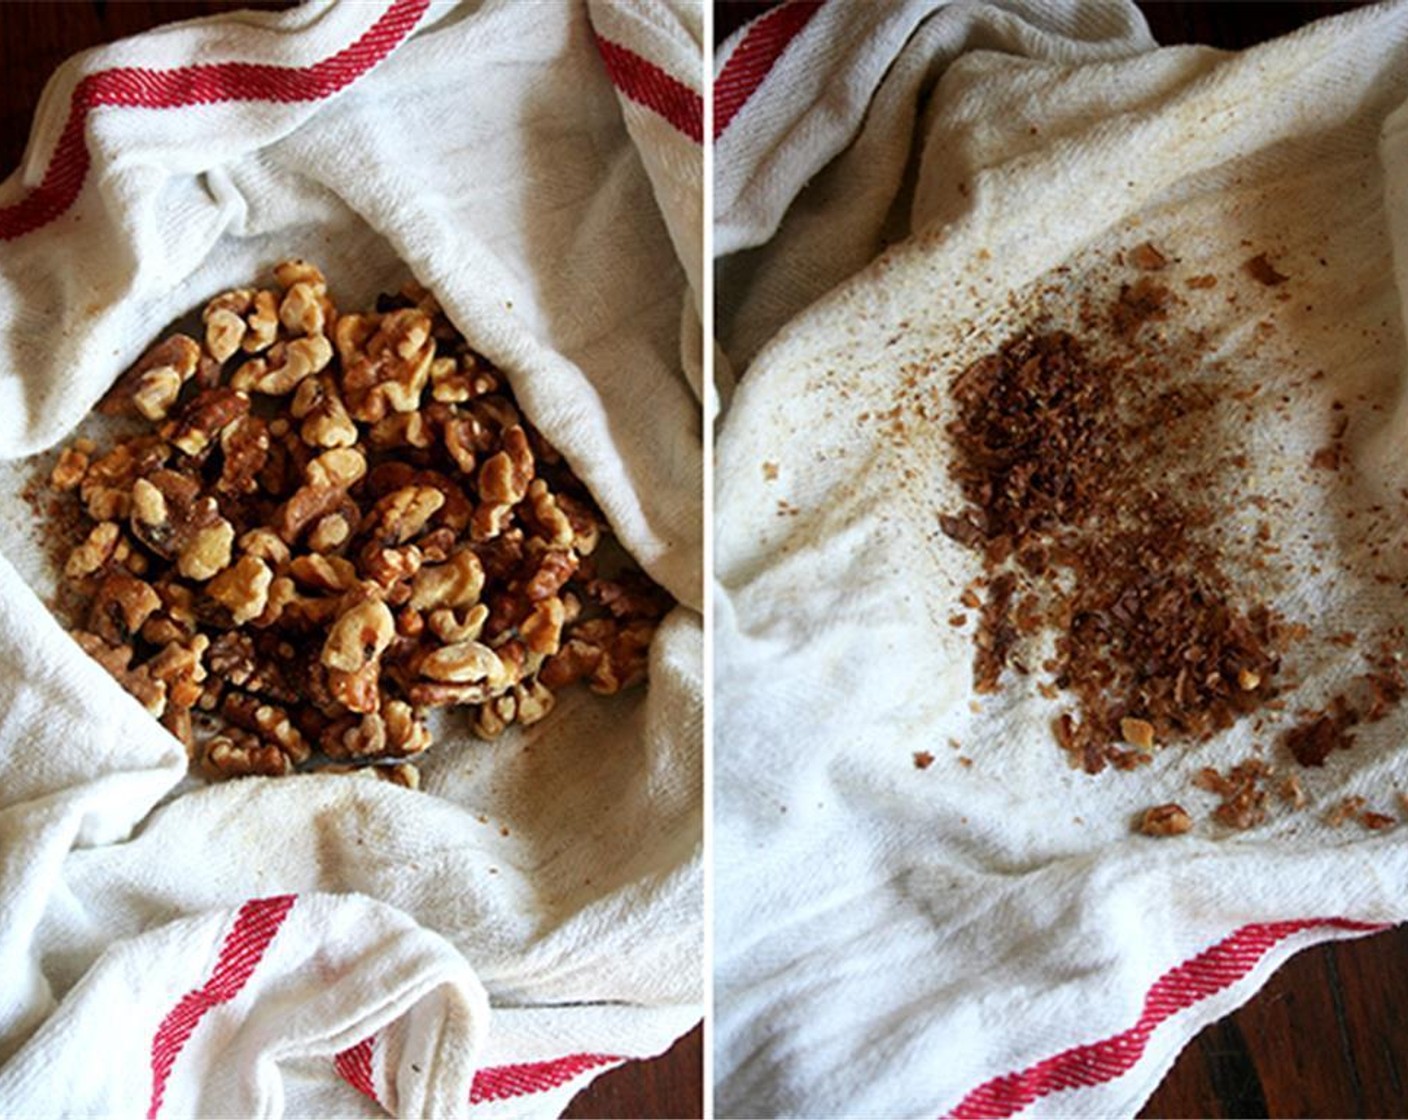 step 2 Pour the nuts into a tea towel and rub well to remove as much skin as possible. Chop the walnuts coarsely and toss in a sieve to remove any remaining skin or dust.